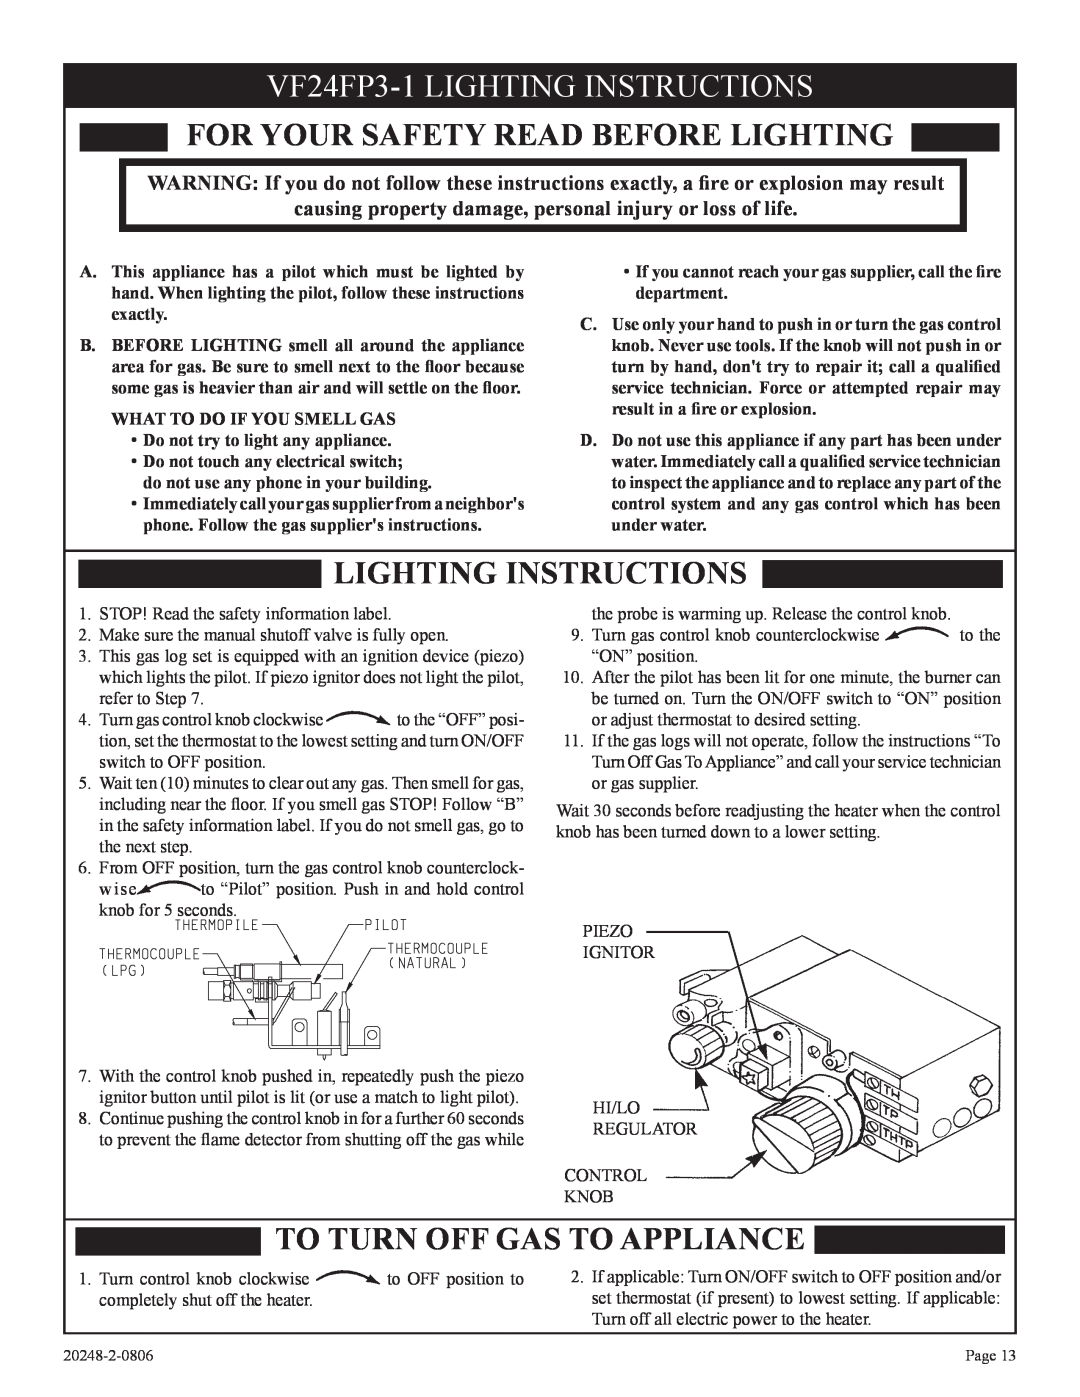 Empire Comfort Systems VF24FP3-1LIGHTING INSTRUCTIONS, For Your Safety Read Before Lighting, Lighting Instructions 